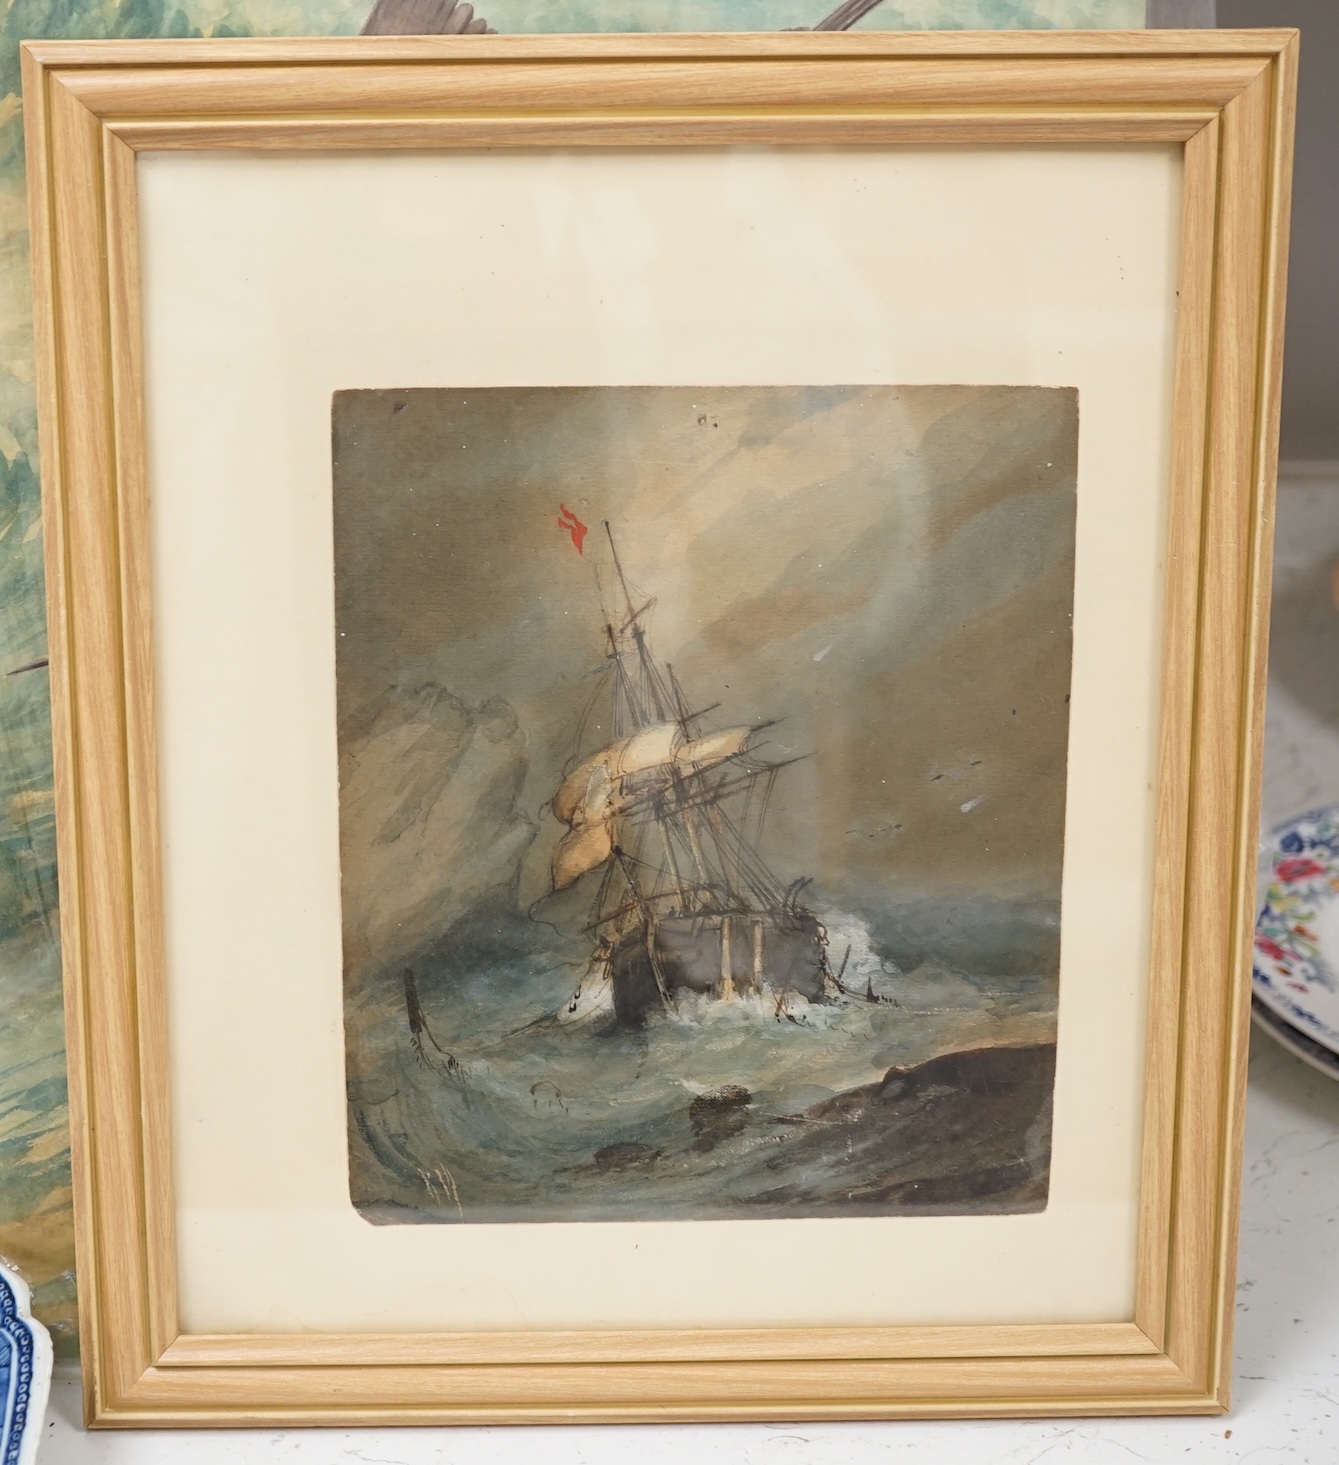 Richmond W. Markes (fl. 1890-1920), watercolour, Seascape with rigged ship, 21 x 18cm. Condition - fair, discolouration and minor creasing to the corners